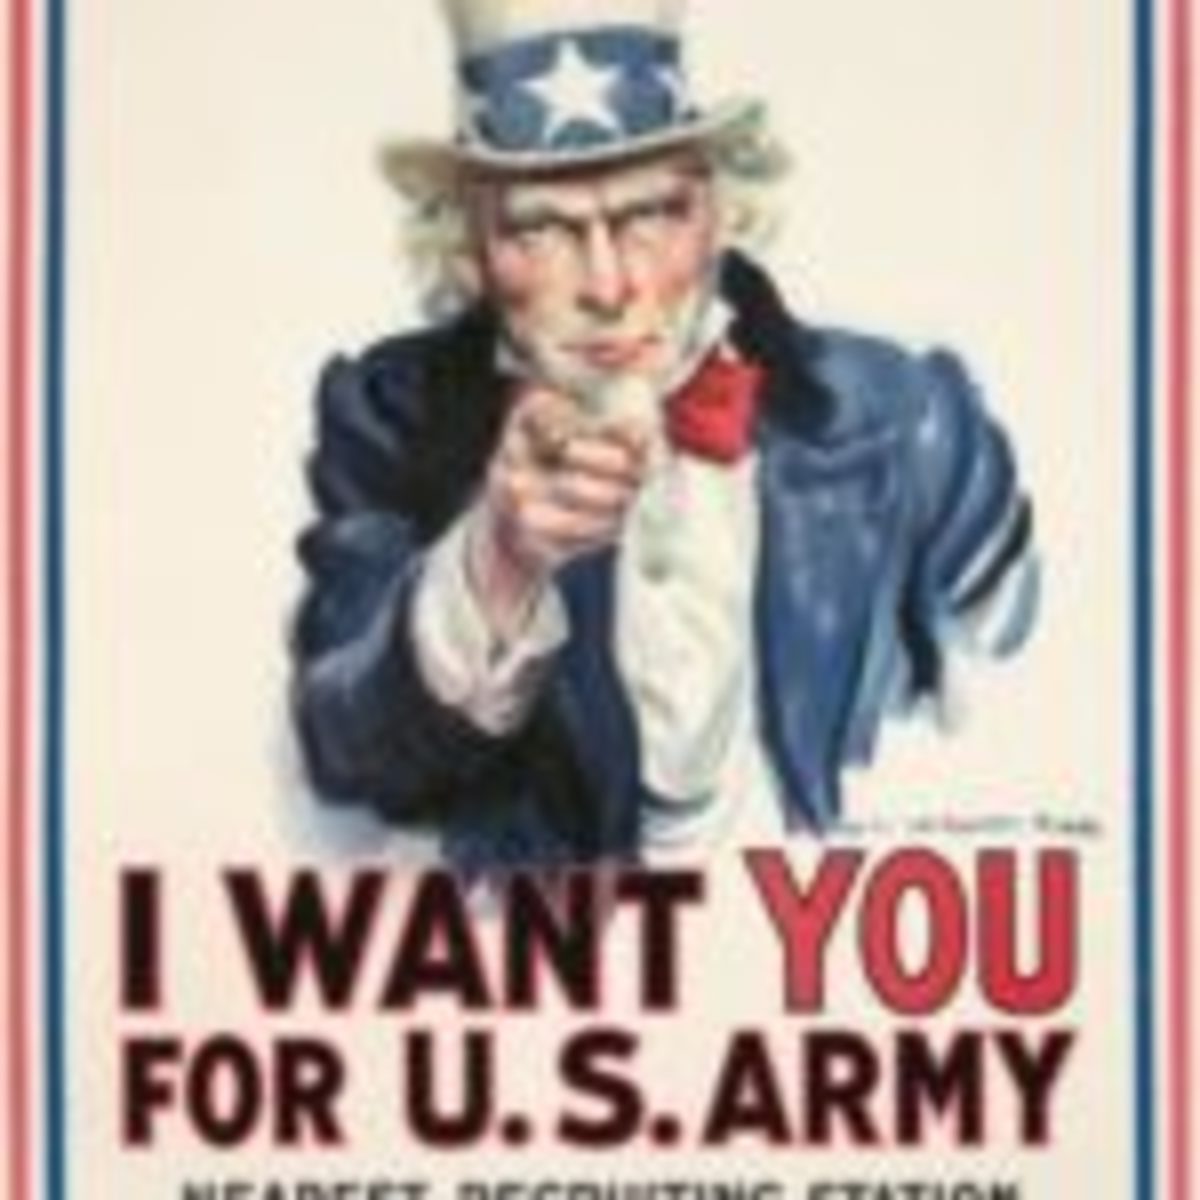 90. I Want You for U.S. Army, 1917. James Montgomery Flagg, $6,000-$8,000